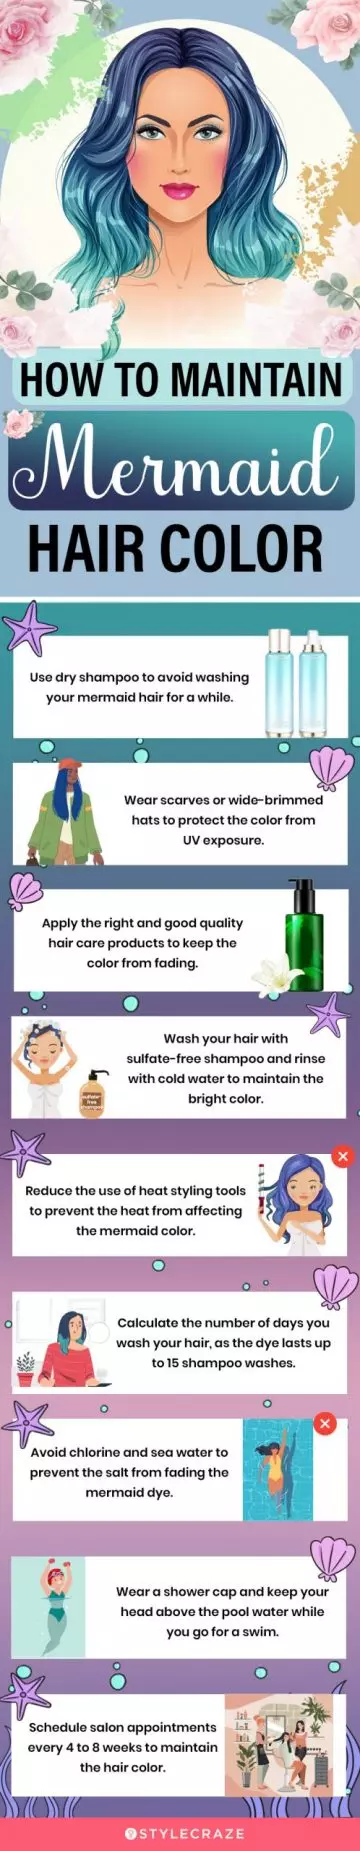 how to maintain mermaid hair color (infographic)